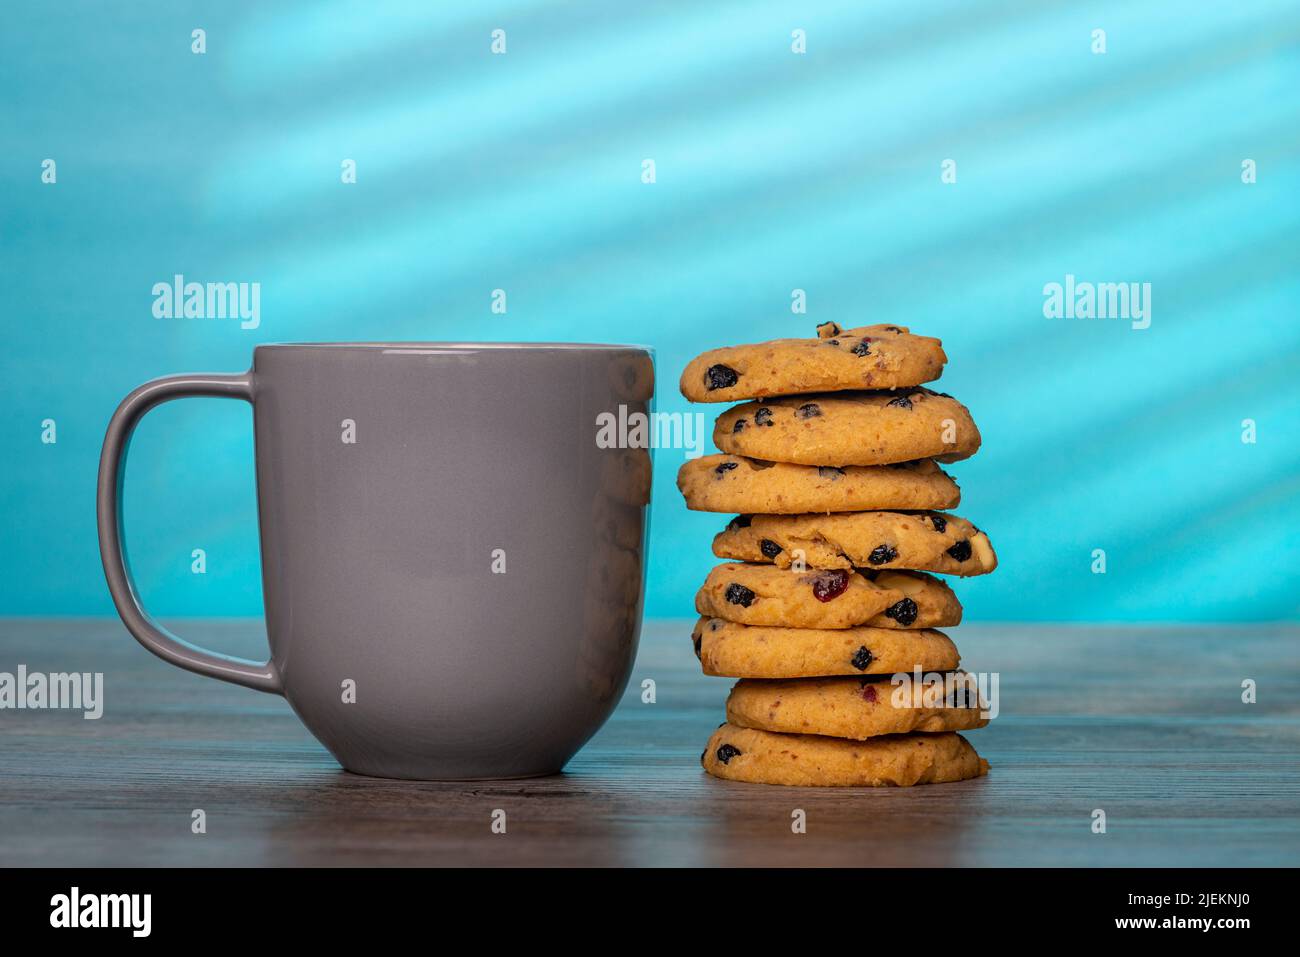 stack of home cooked cookies and a grey mug against a blue background Stock Photo